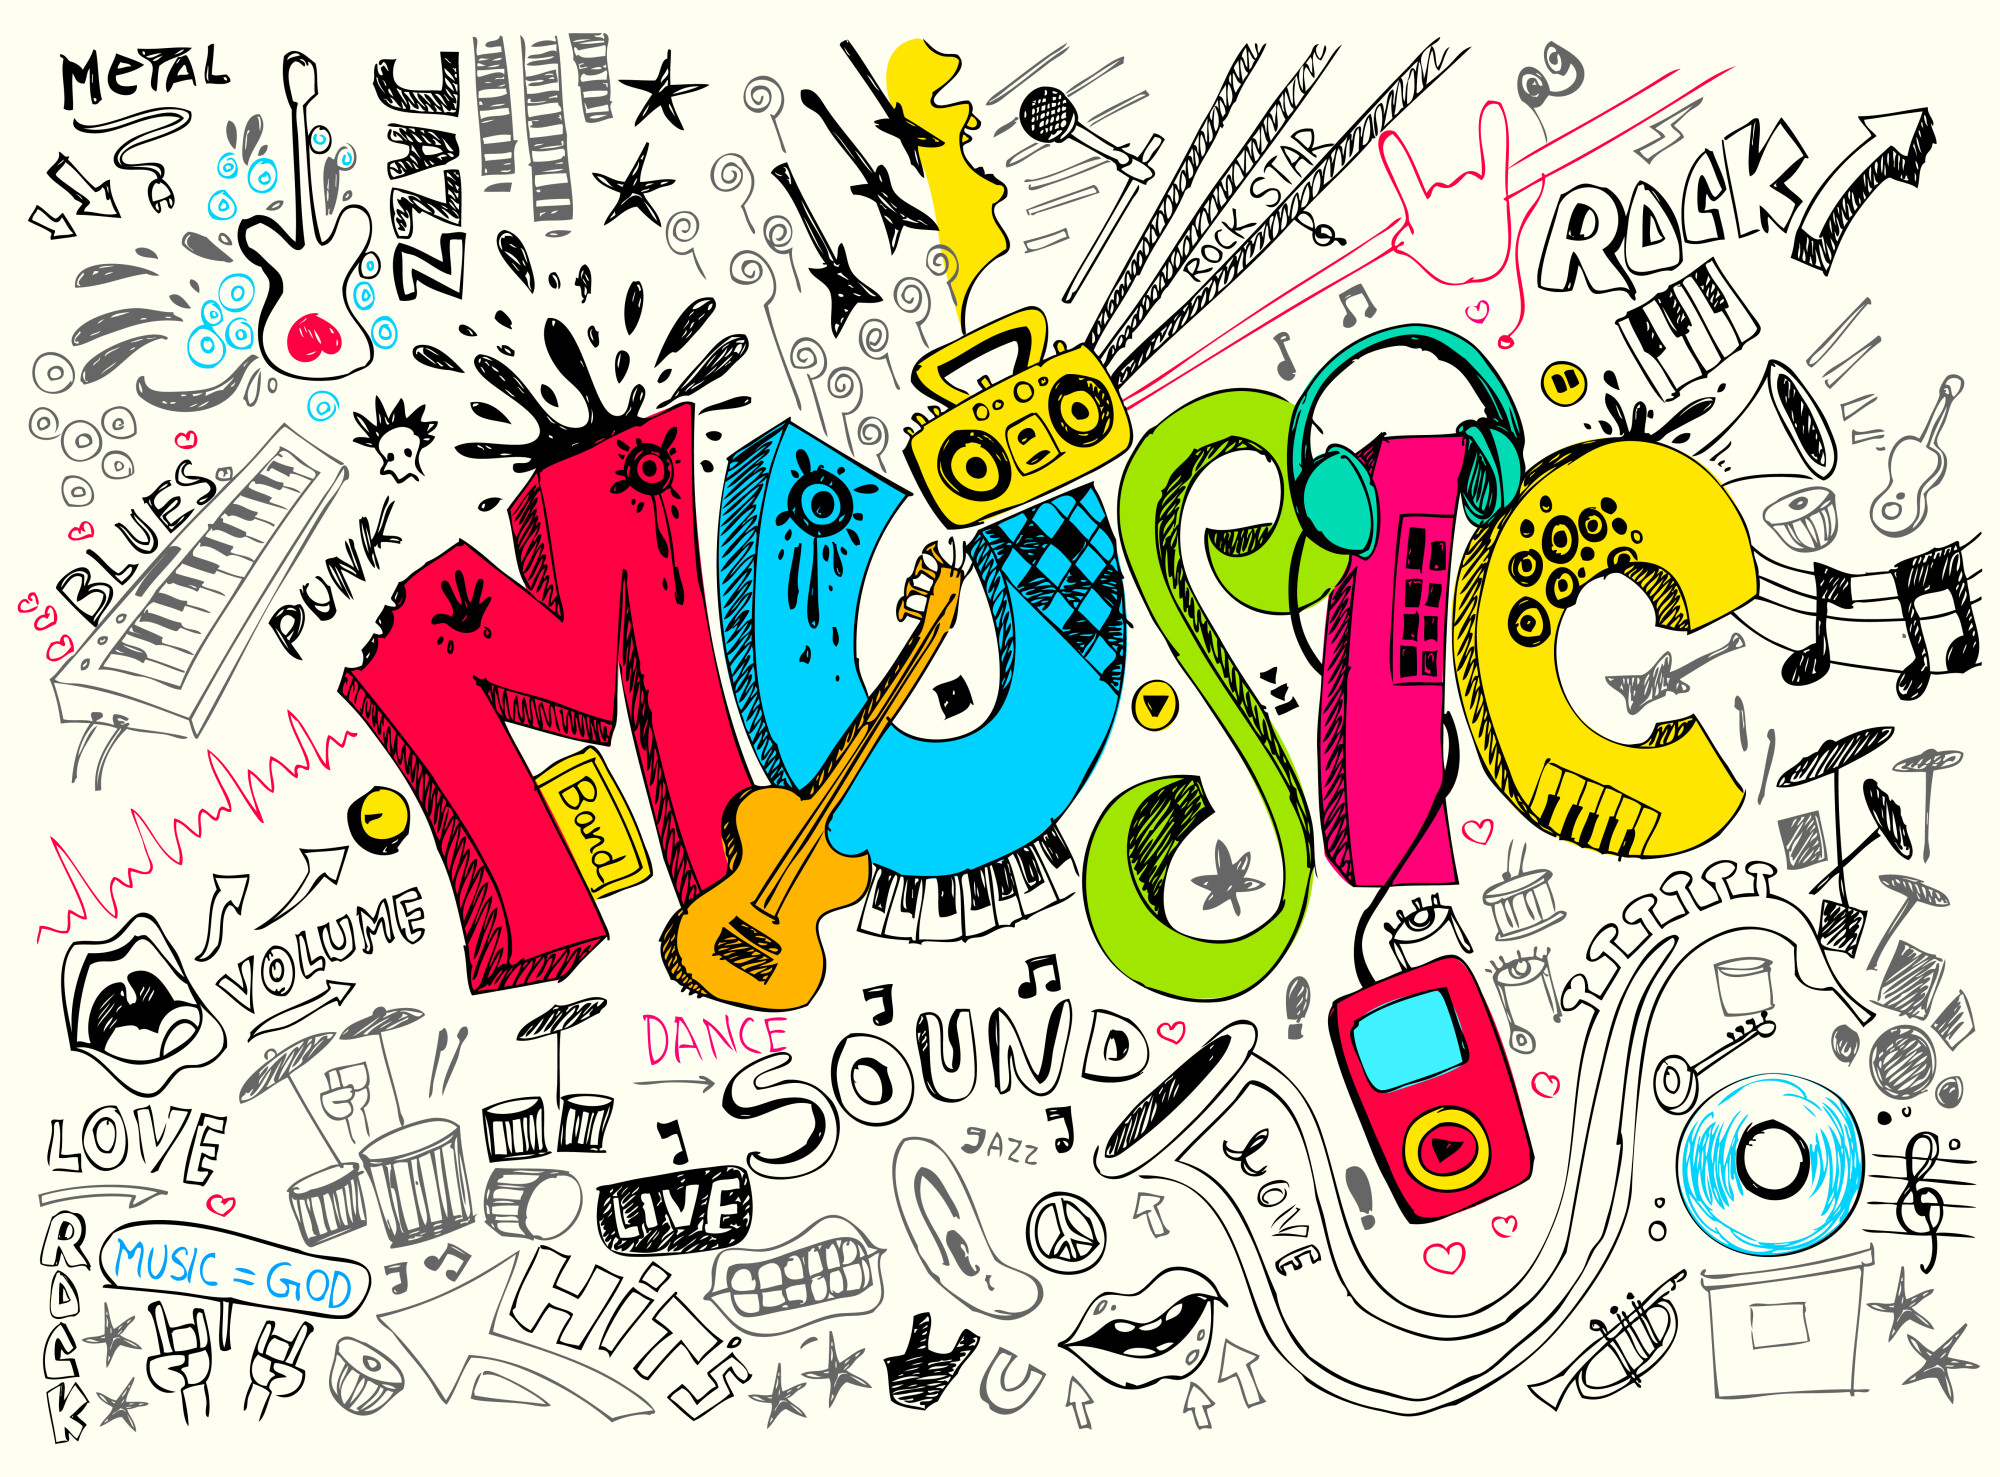 The word MUSIC in stylized form with letters of different colors surrounded by mostly black pictures on a white background of ways to make music or listen to music.